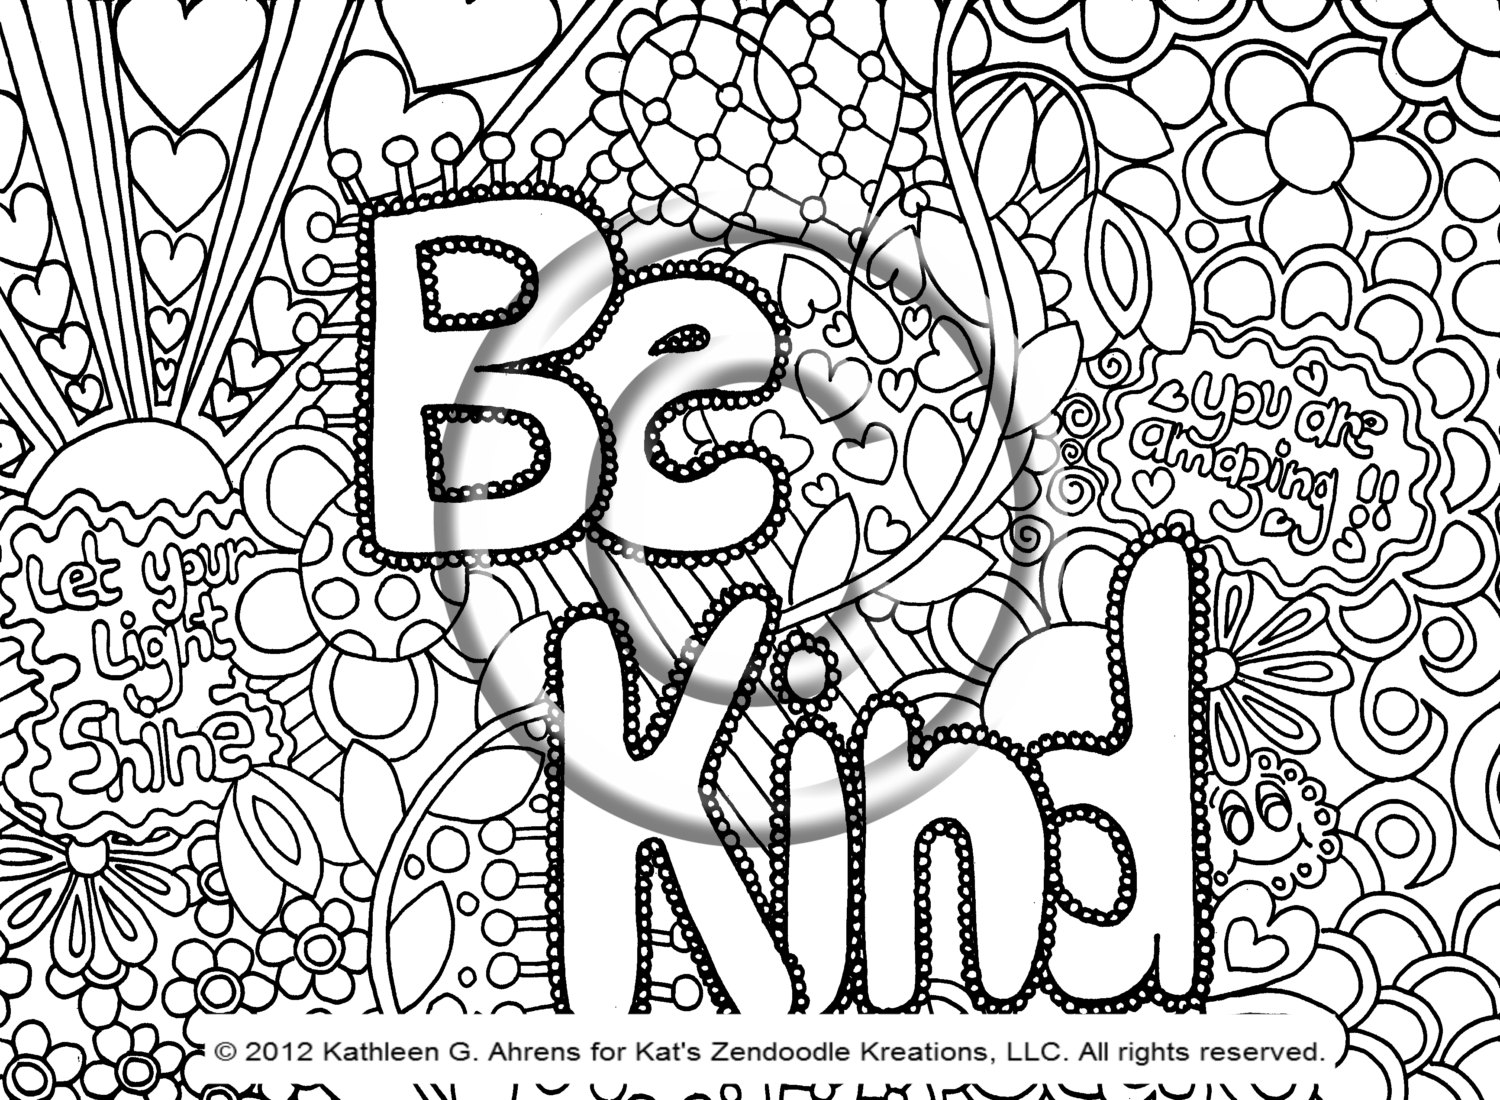 Trippy Coloring Pages To Print - Coloring Home